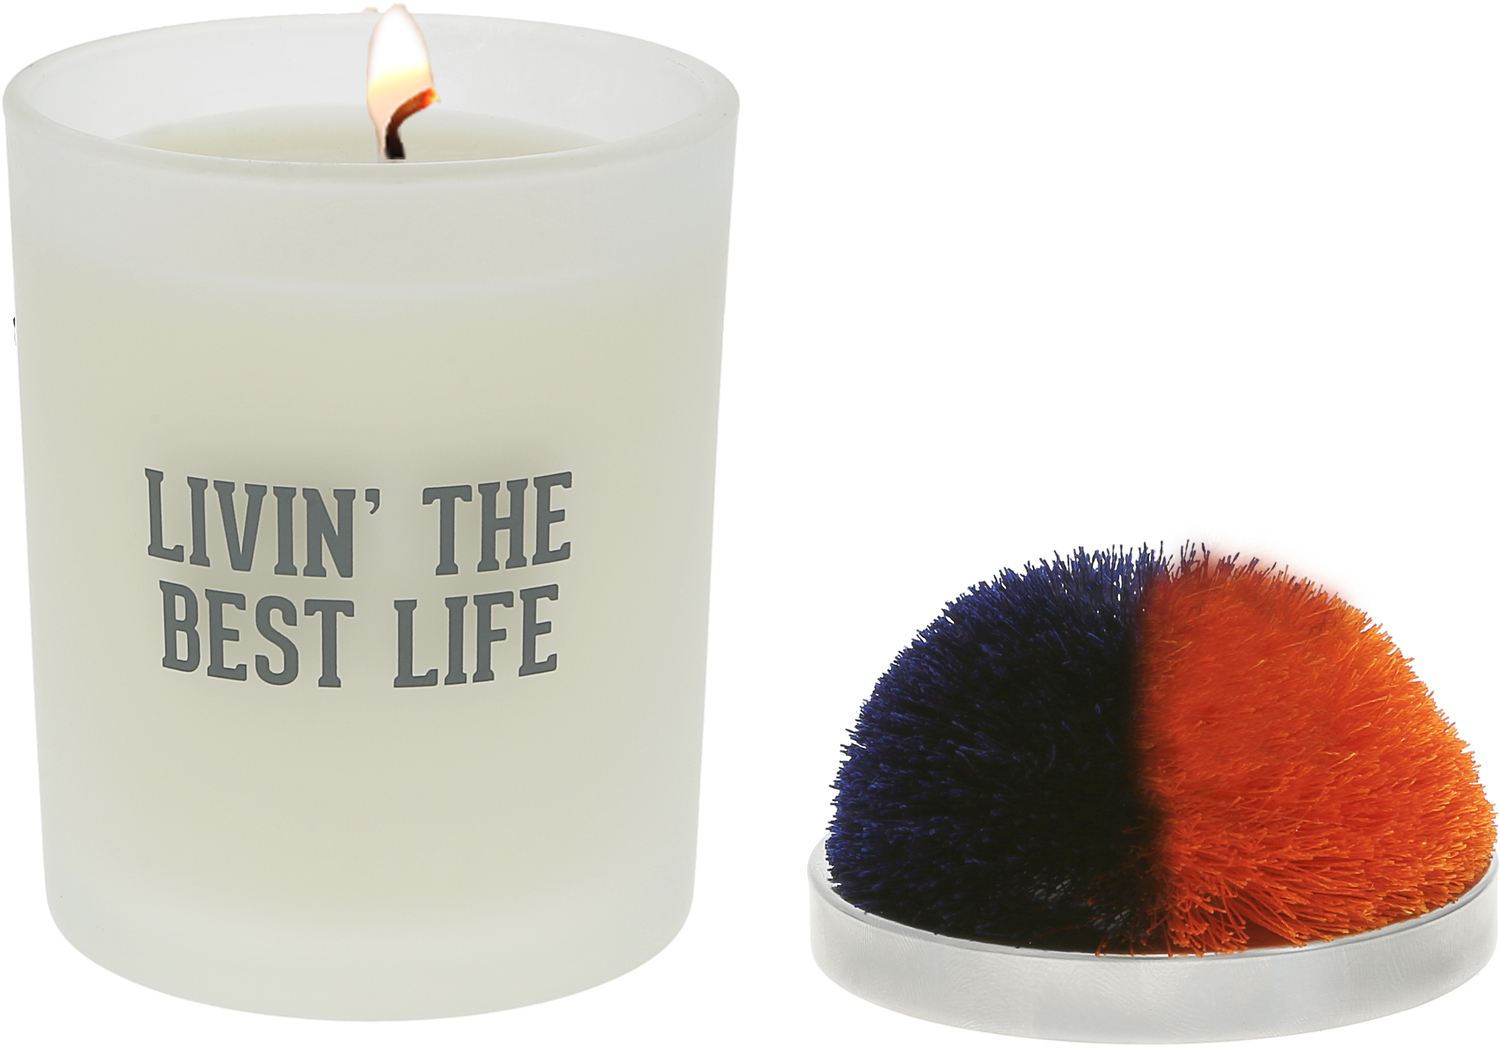 Best Life - Navy & Orange by Repre-Scent - Best Life - Navy & Orange - 5.5 oz - 100% Soy Wax Candle with Pom Pom Lid
Scent: Tranquility